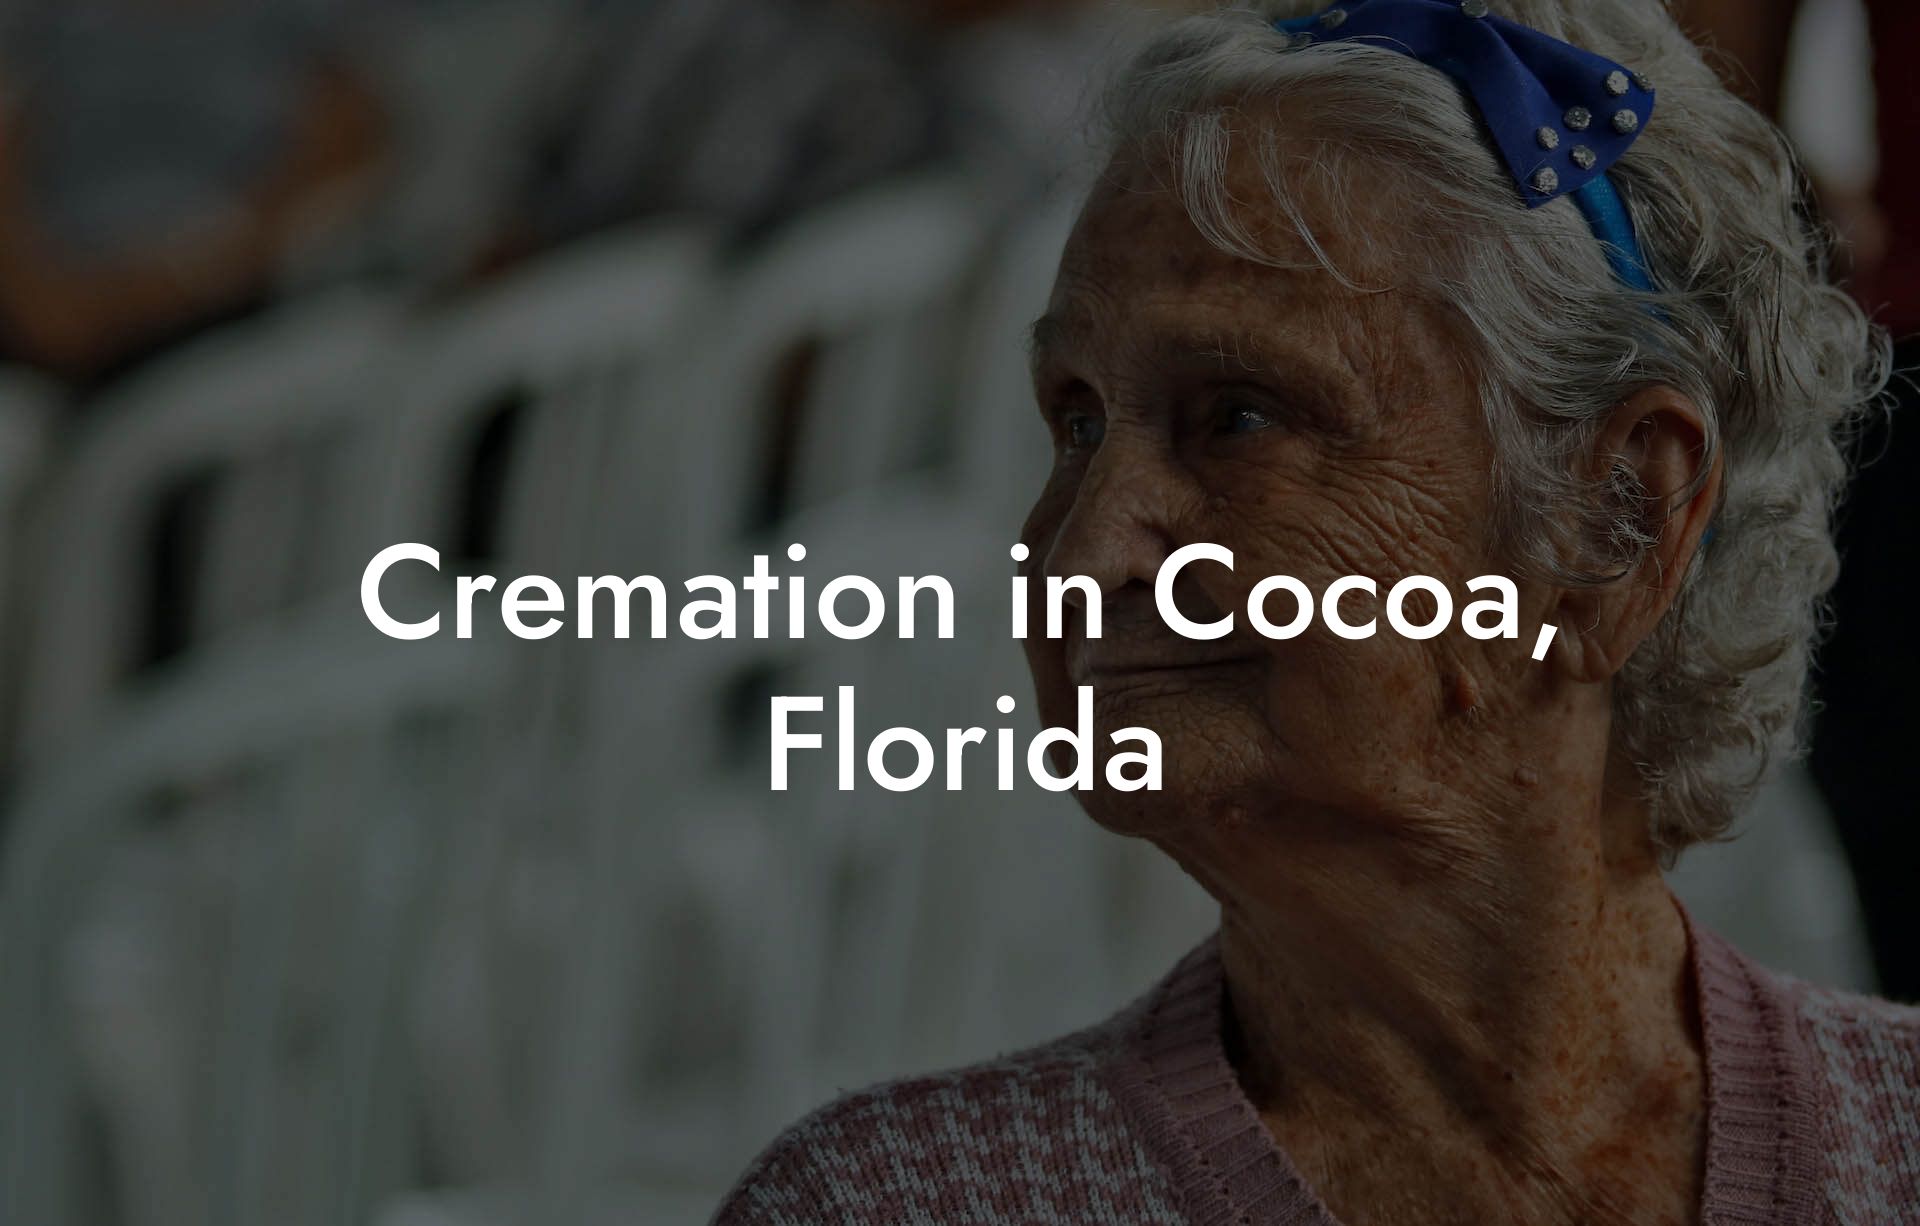 Cremation in Cocoa, Florida